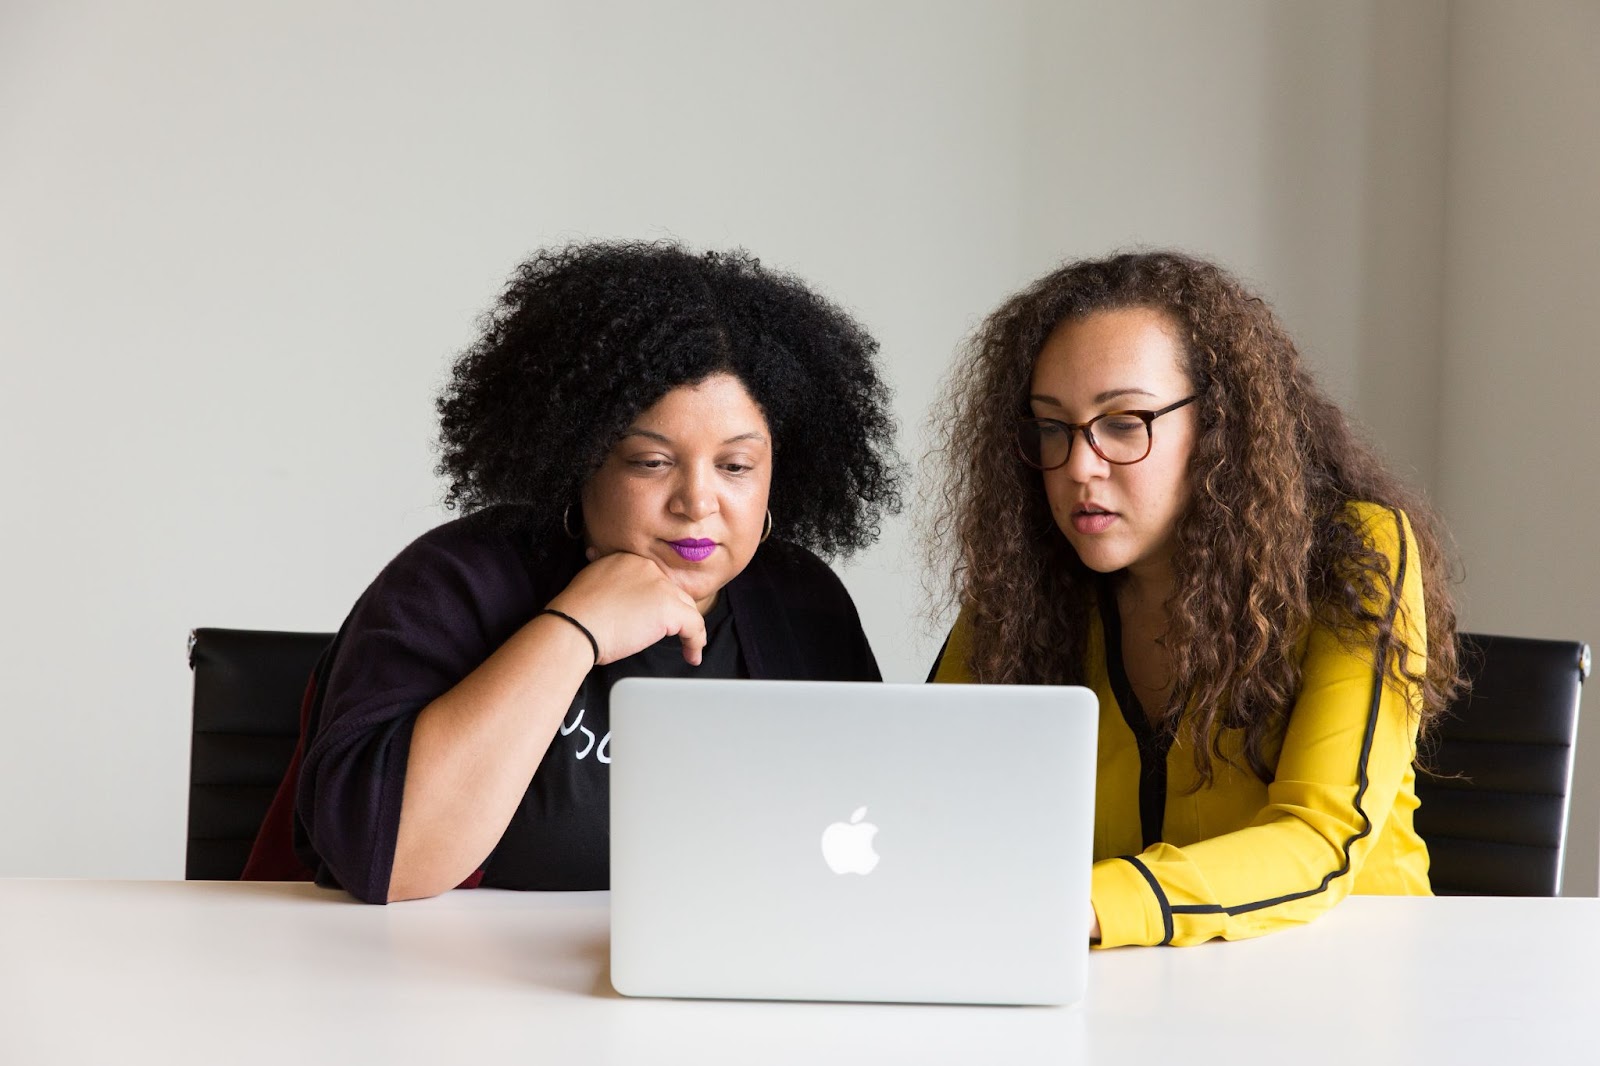 Two women in an office working on improving UX designer skills through a UX design course
